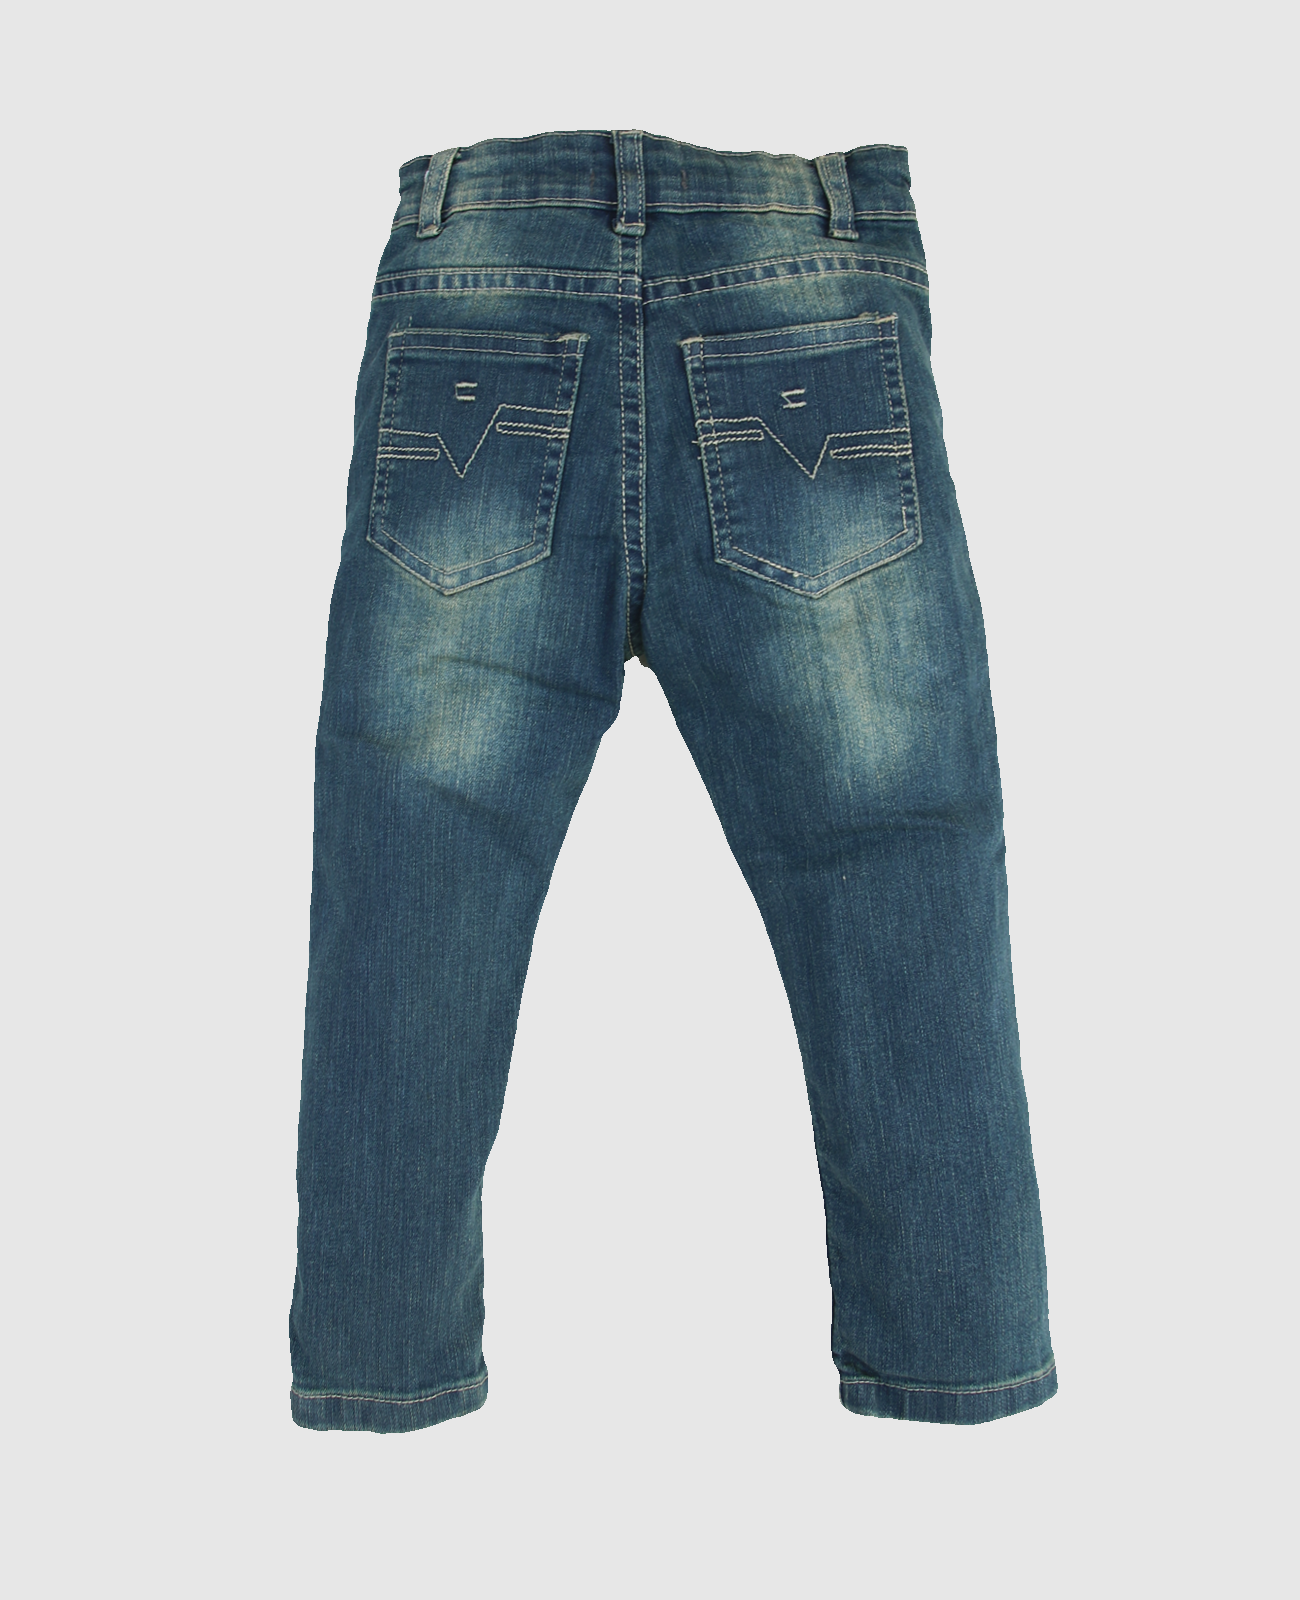 Dirty Wash Slim Fit Jeans